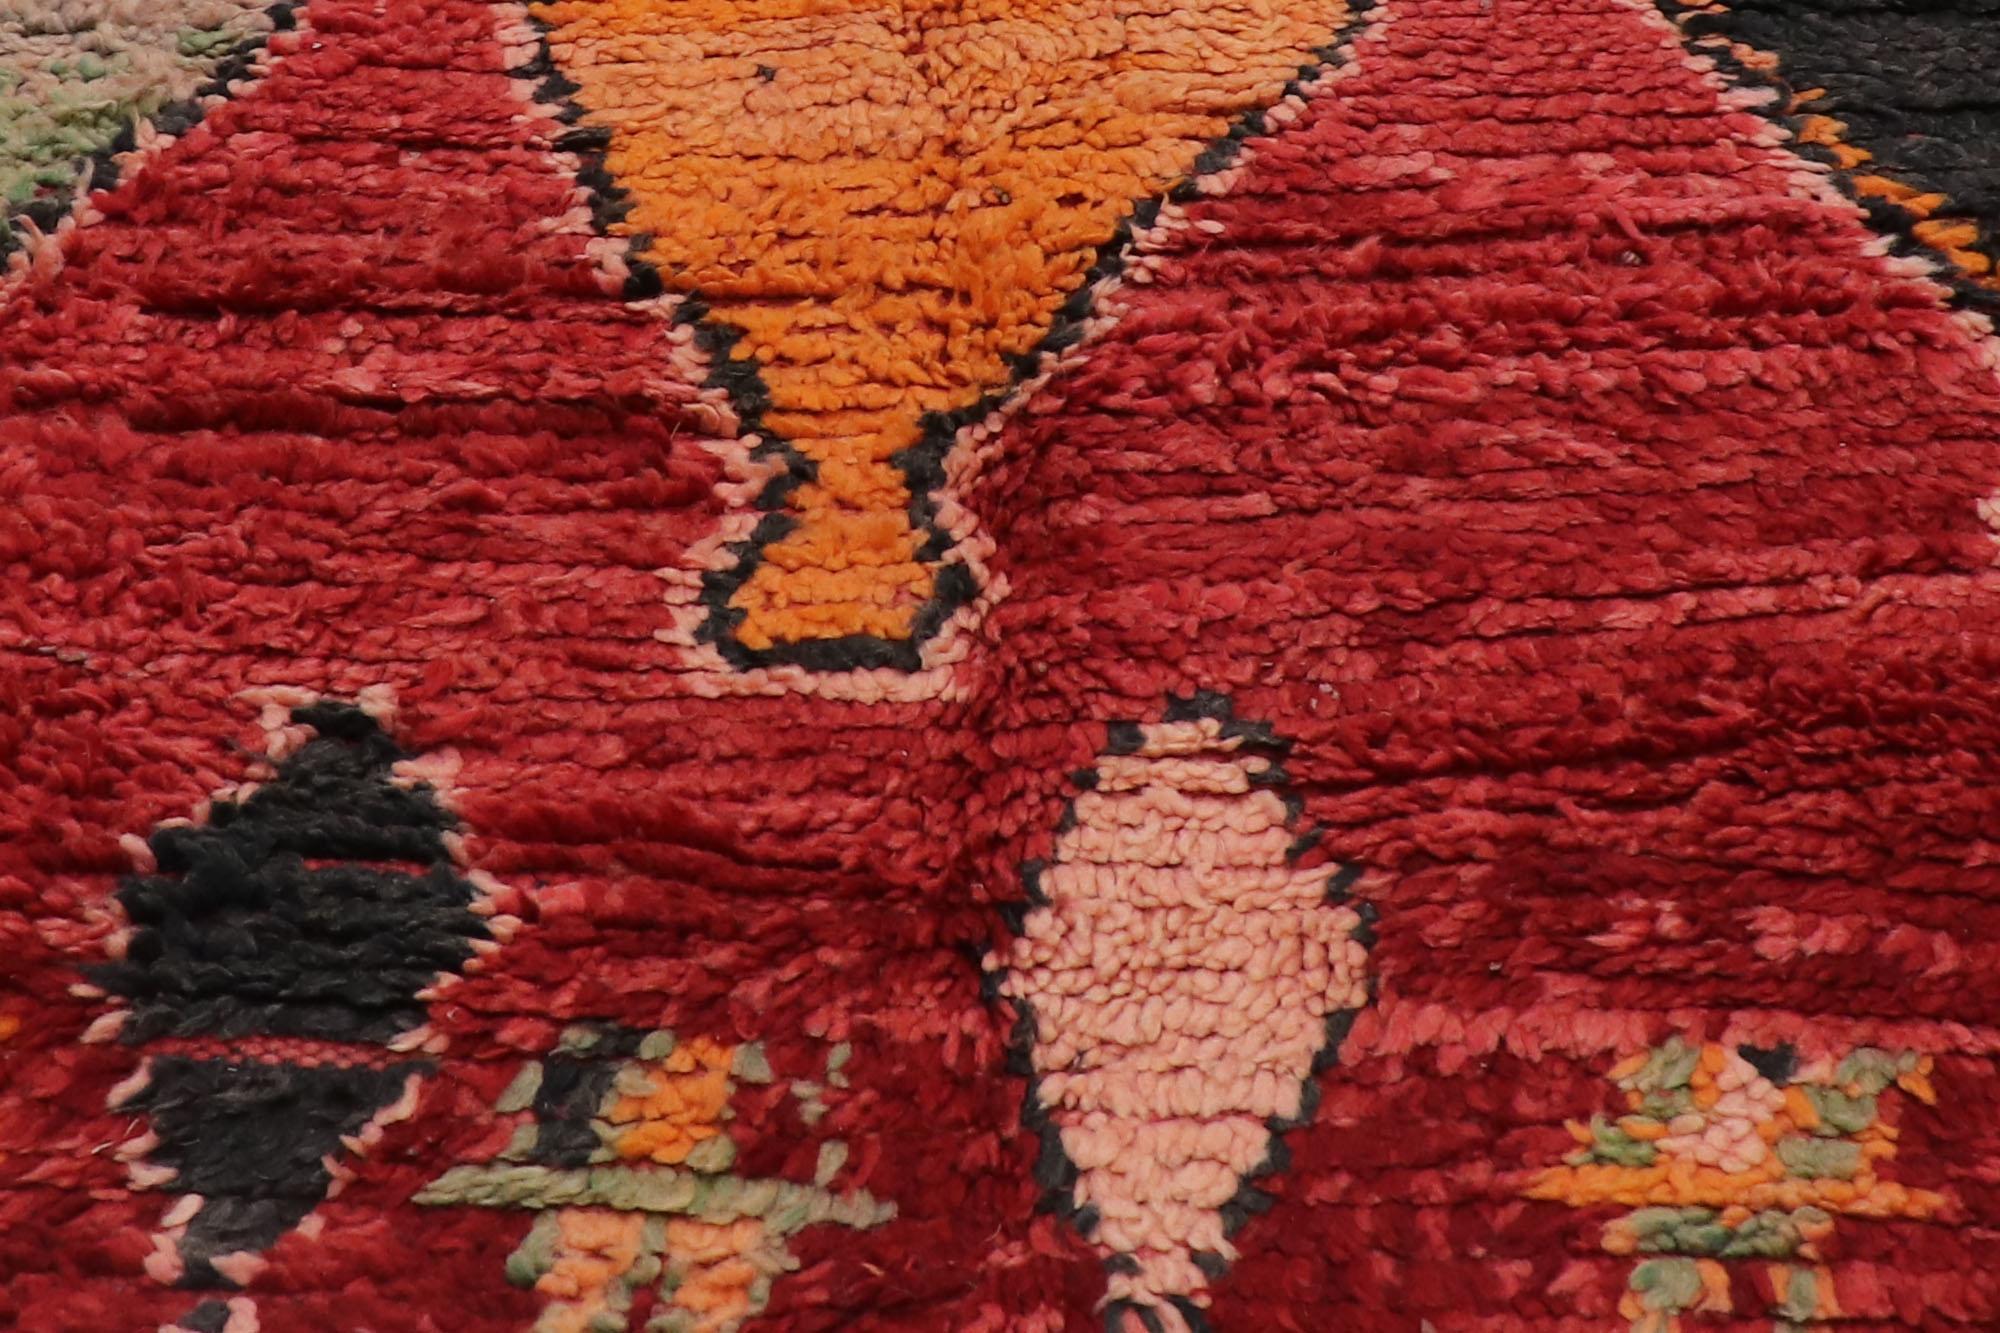 Vintage Berber Moroccan Rug, Cozy Nomad Meets Maximalist Style In Good Condition For Sale In Dallas, TX